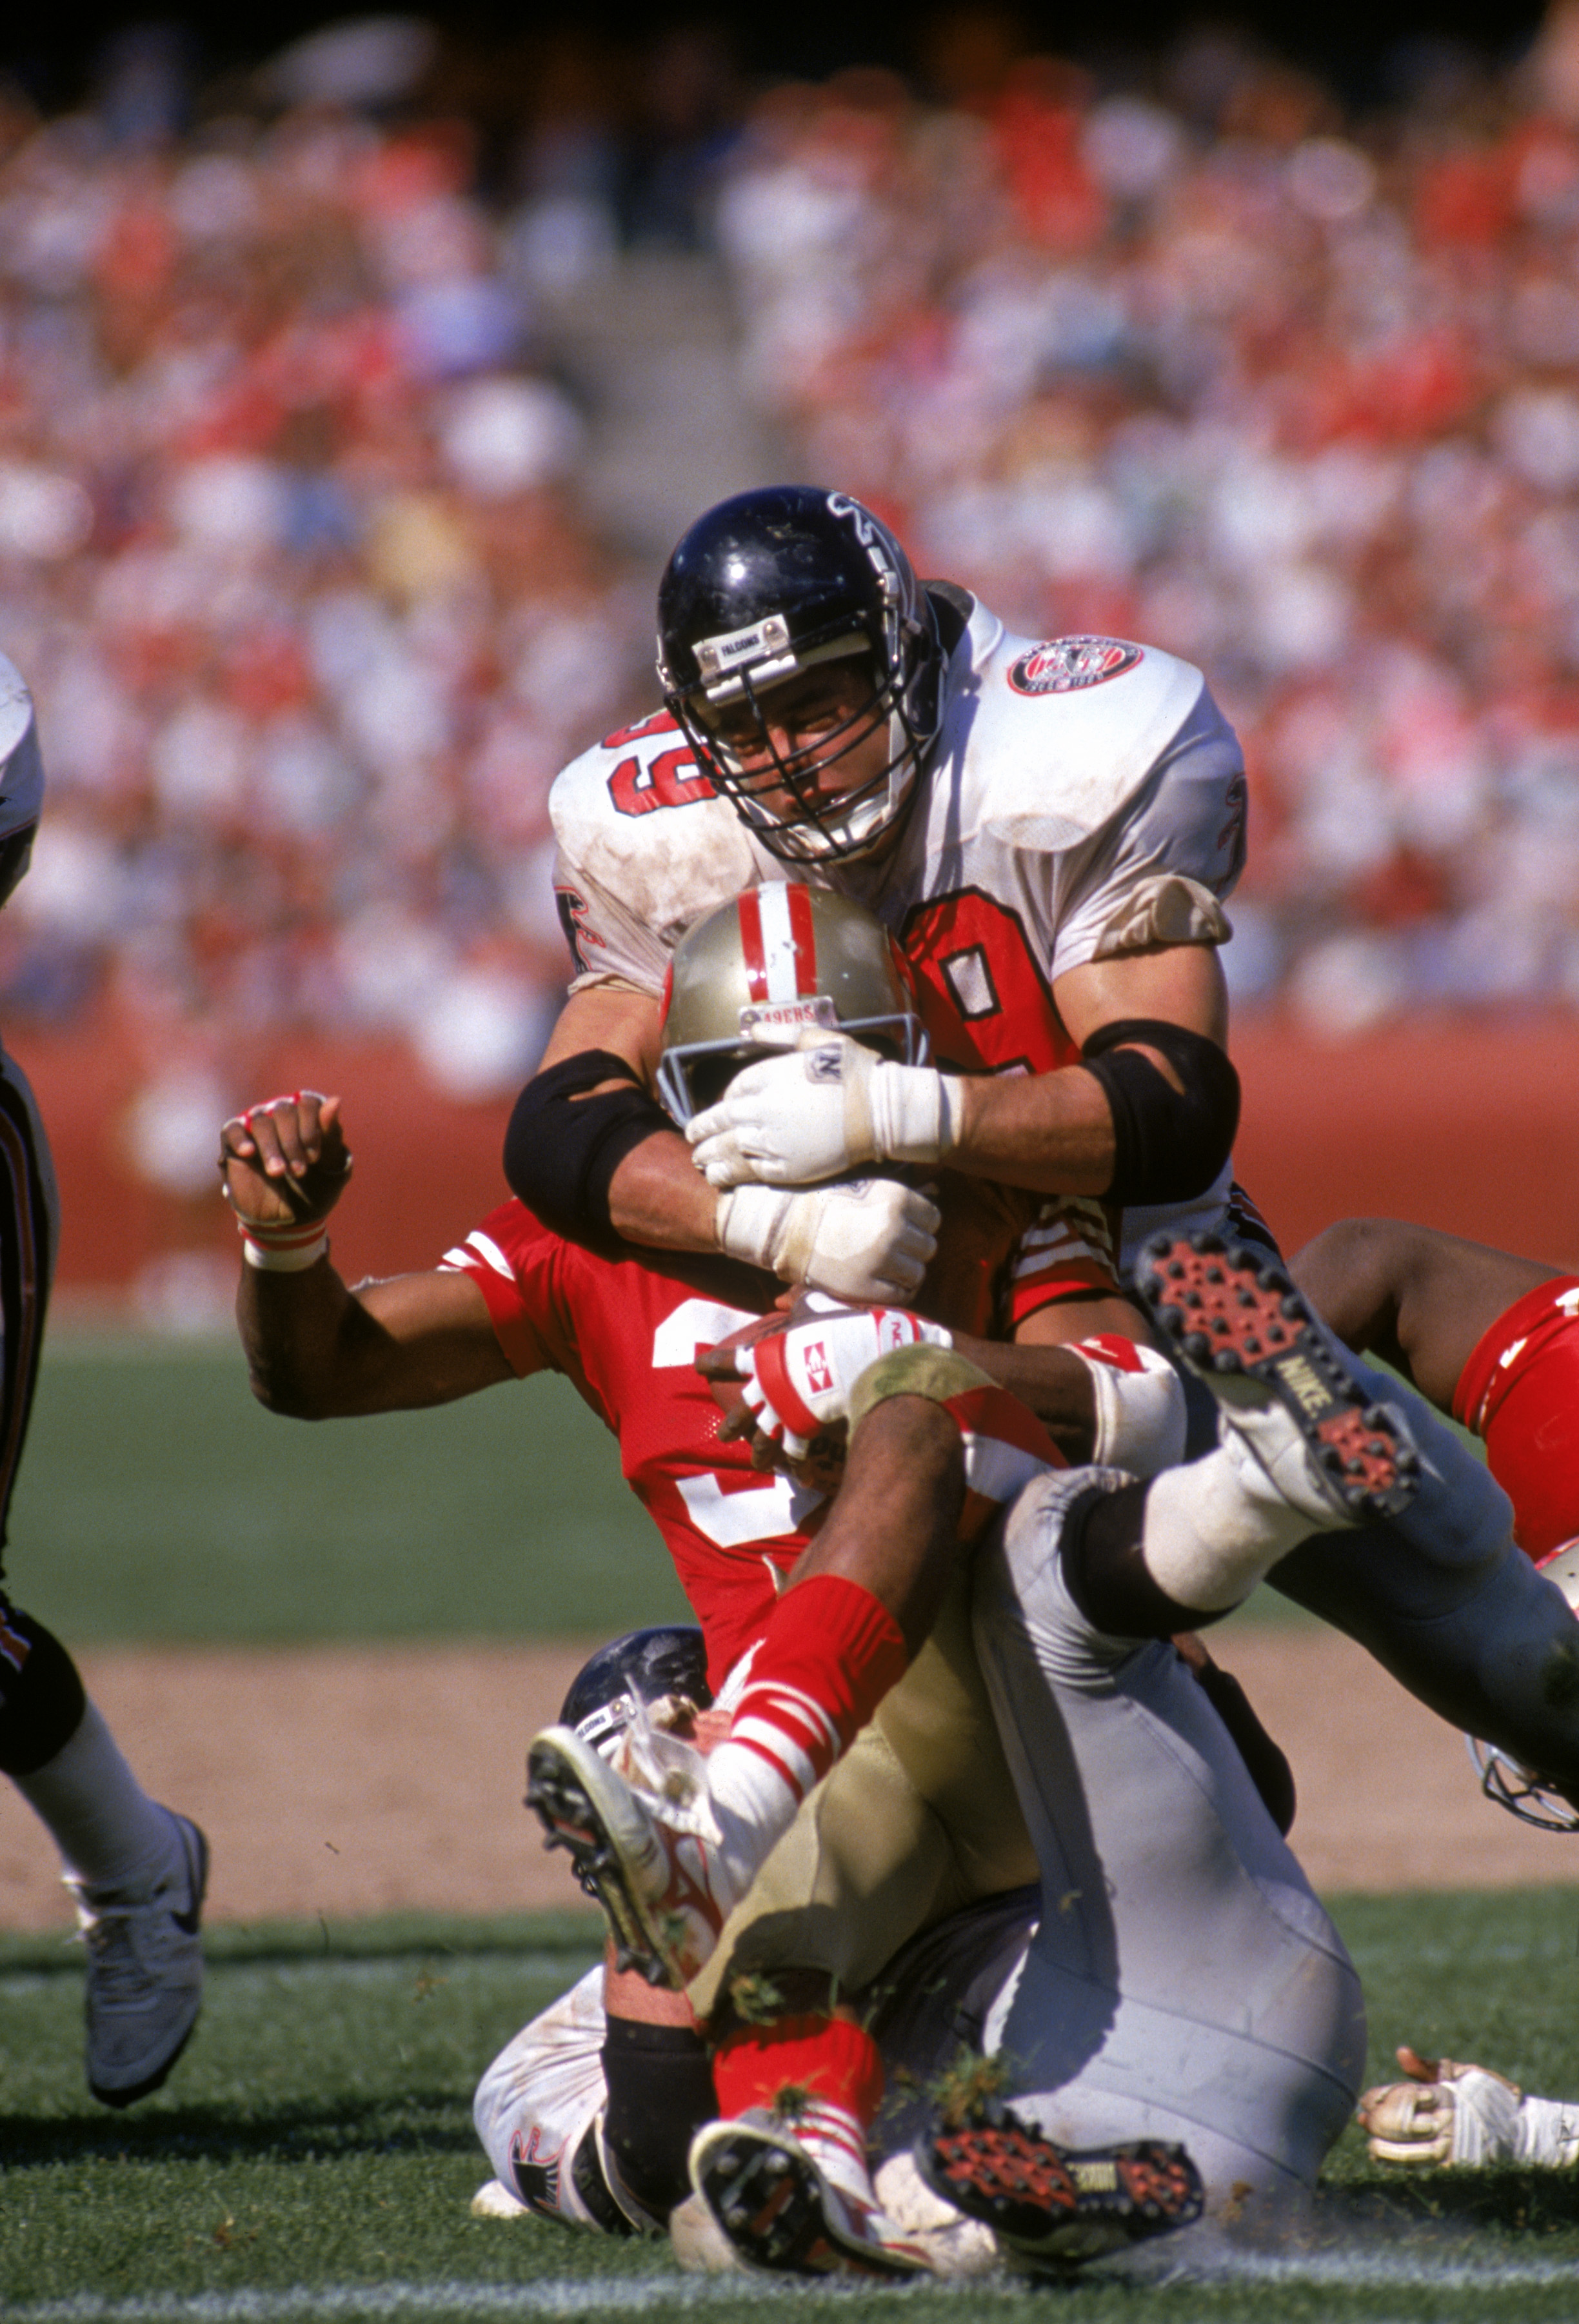 Defensive end Tim Green #99 of the Atlanta Falcons tackles running back Roger Craig #33 of the San Francisco 49ers during a game at Candlestick Park on Sept. 23, 1990 in San Francisco. (George Rose—Getty Images)